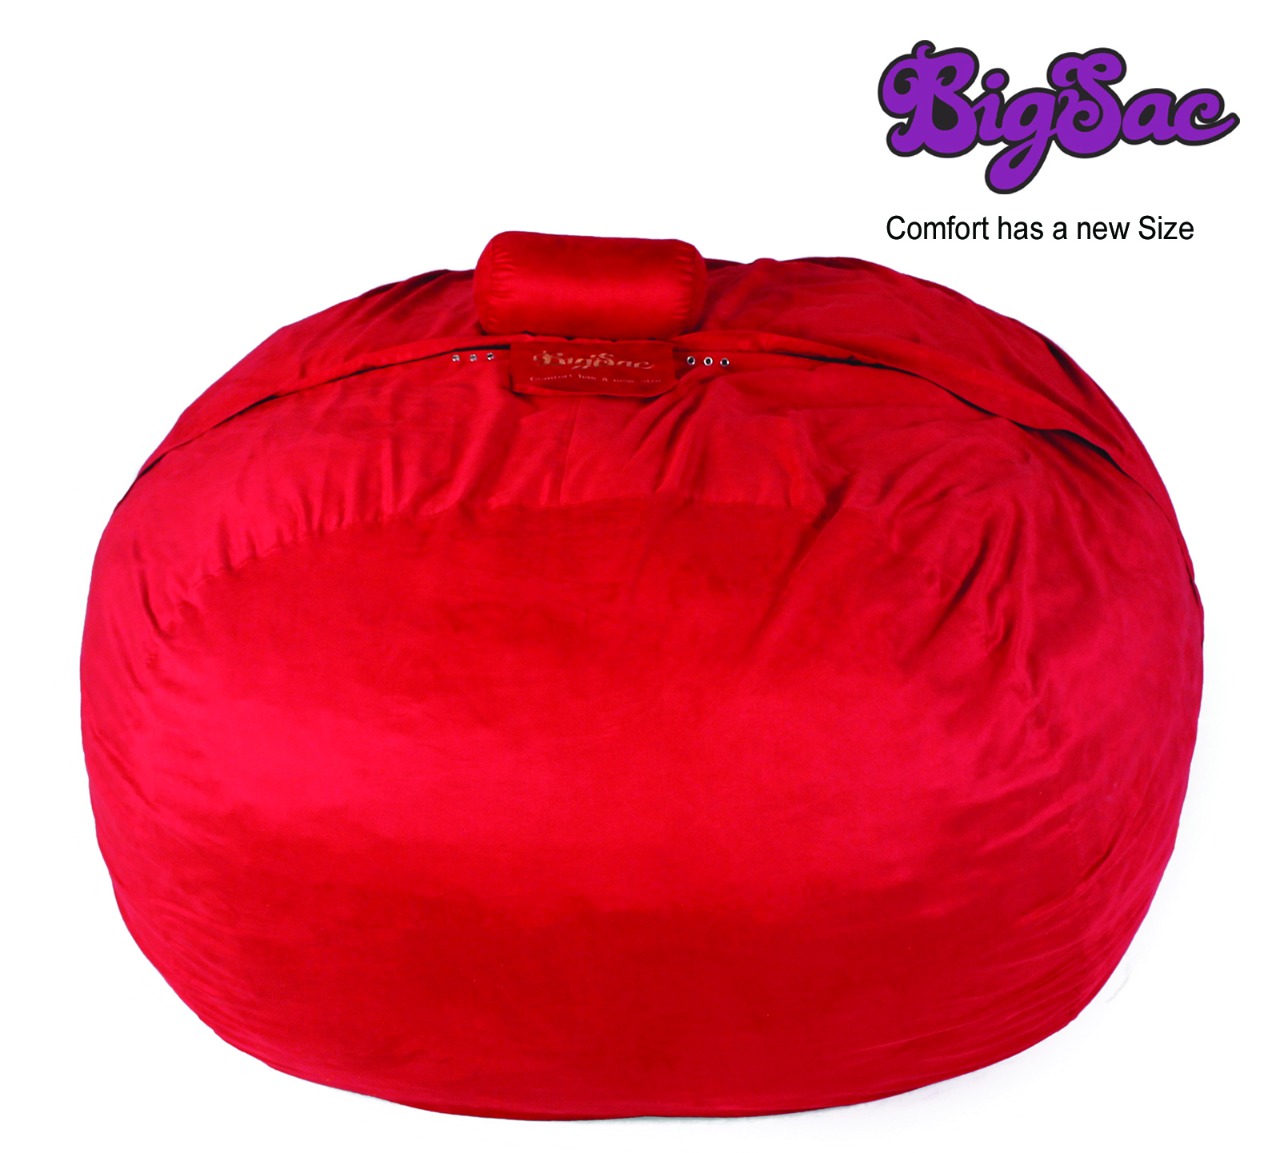 Big Sac 2.5 Feet My Sac Premium Suede Fabric Filled Red Color - 5 Years Warranty            